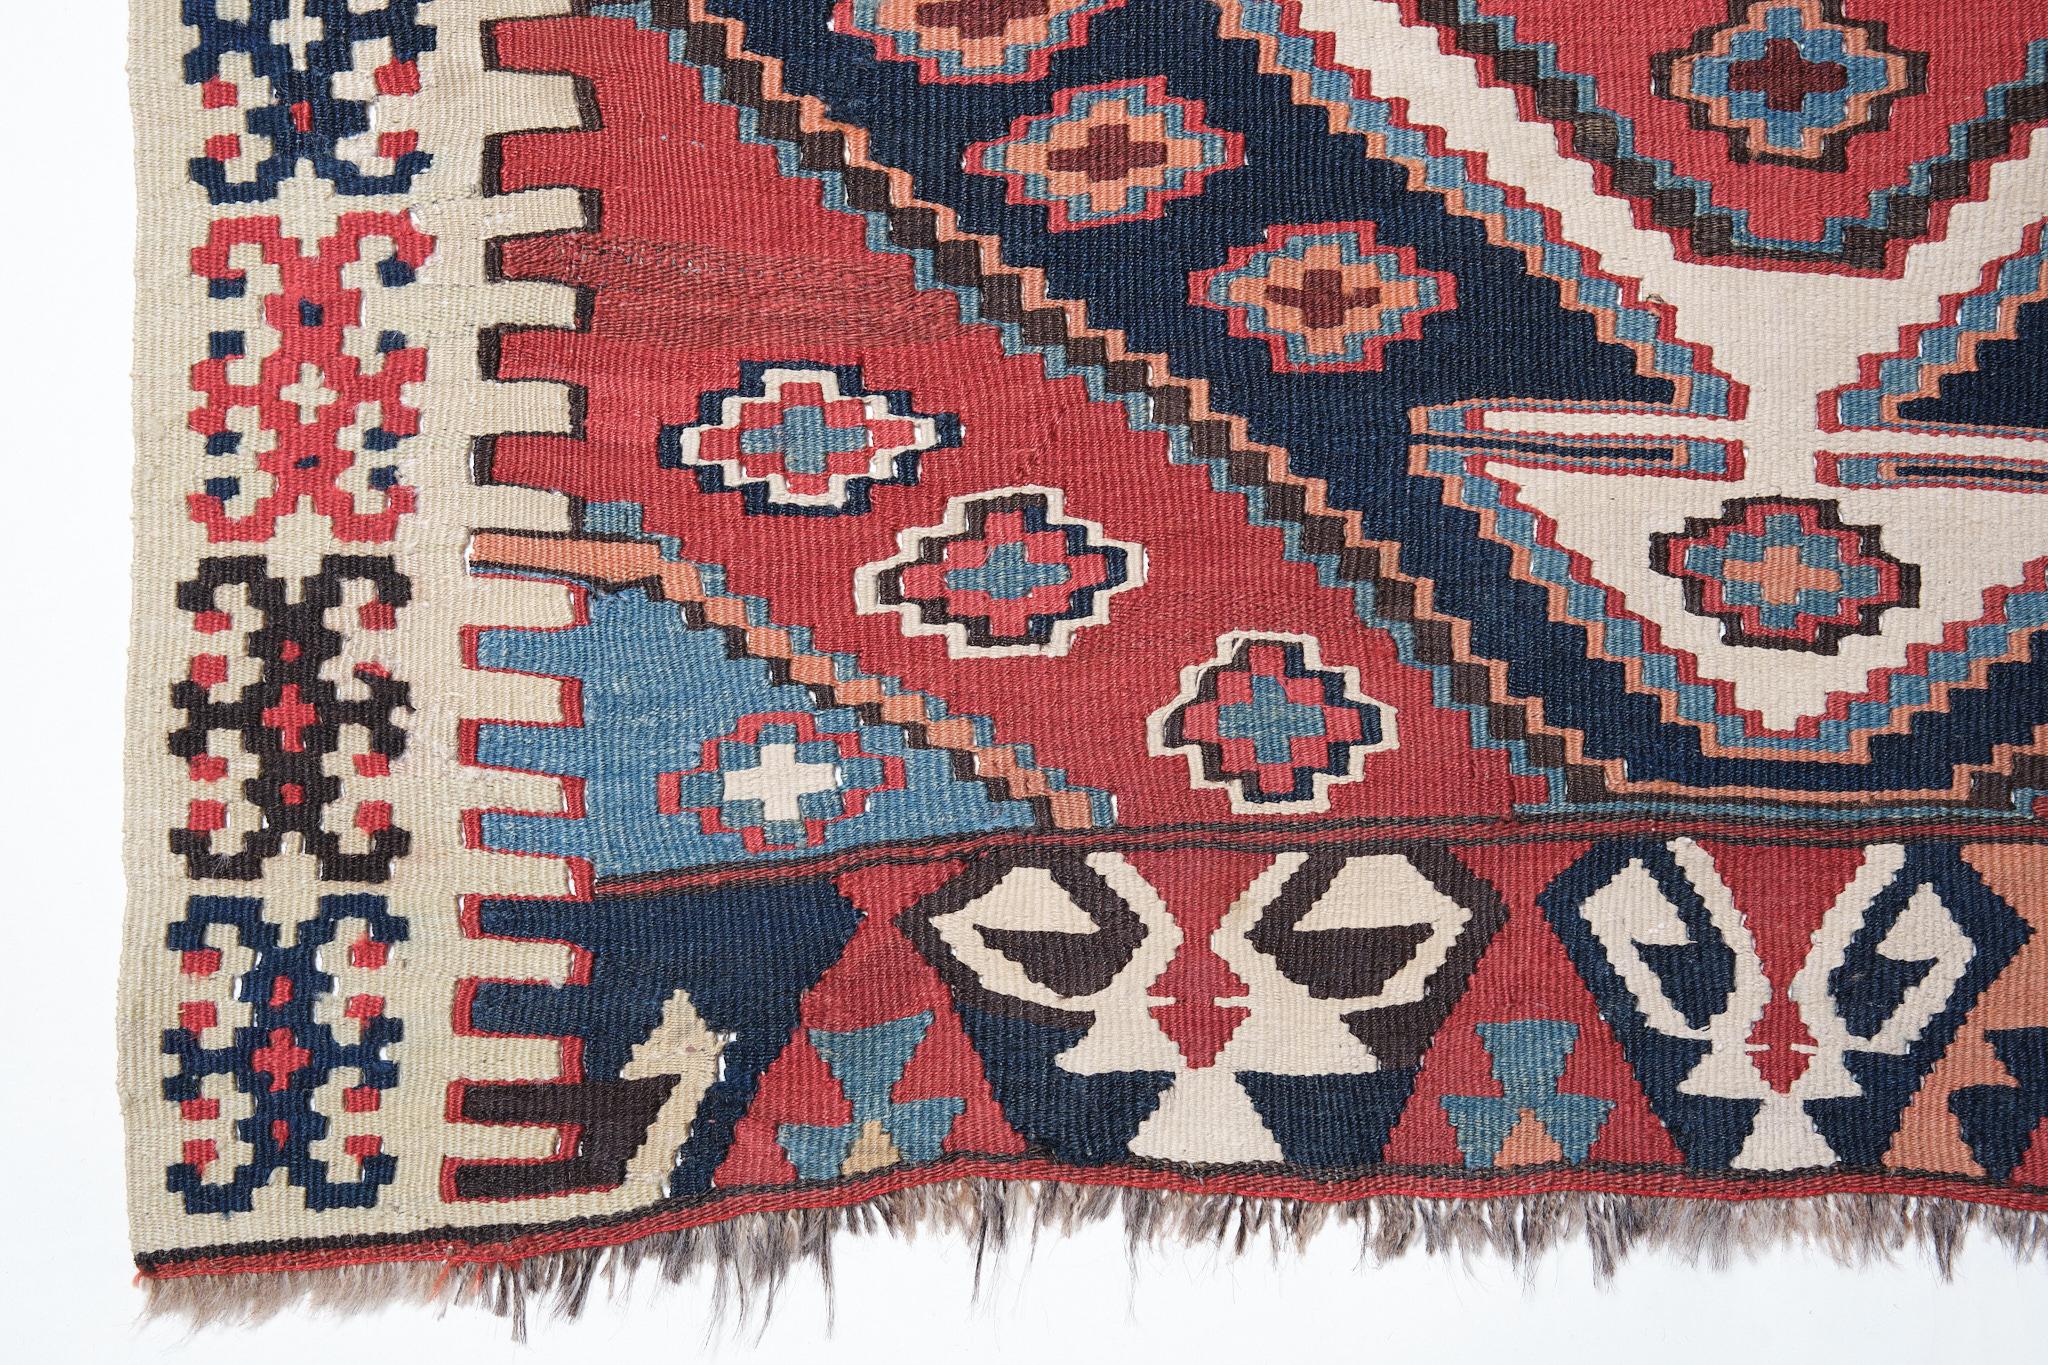 This is a Southern Anatolian Antique Rashwan Kilim from the Malatya region with a rare and beautiful color composition.

It is a large, 4 meters long Kilim with two halves attached and fits almost perfectly. The beauty of the dyed color is a